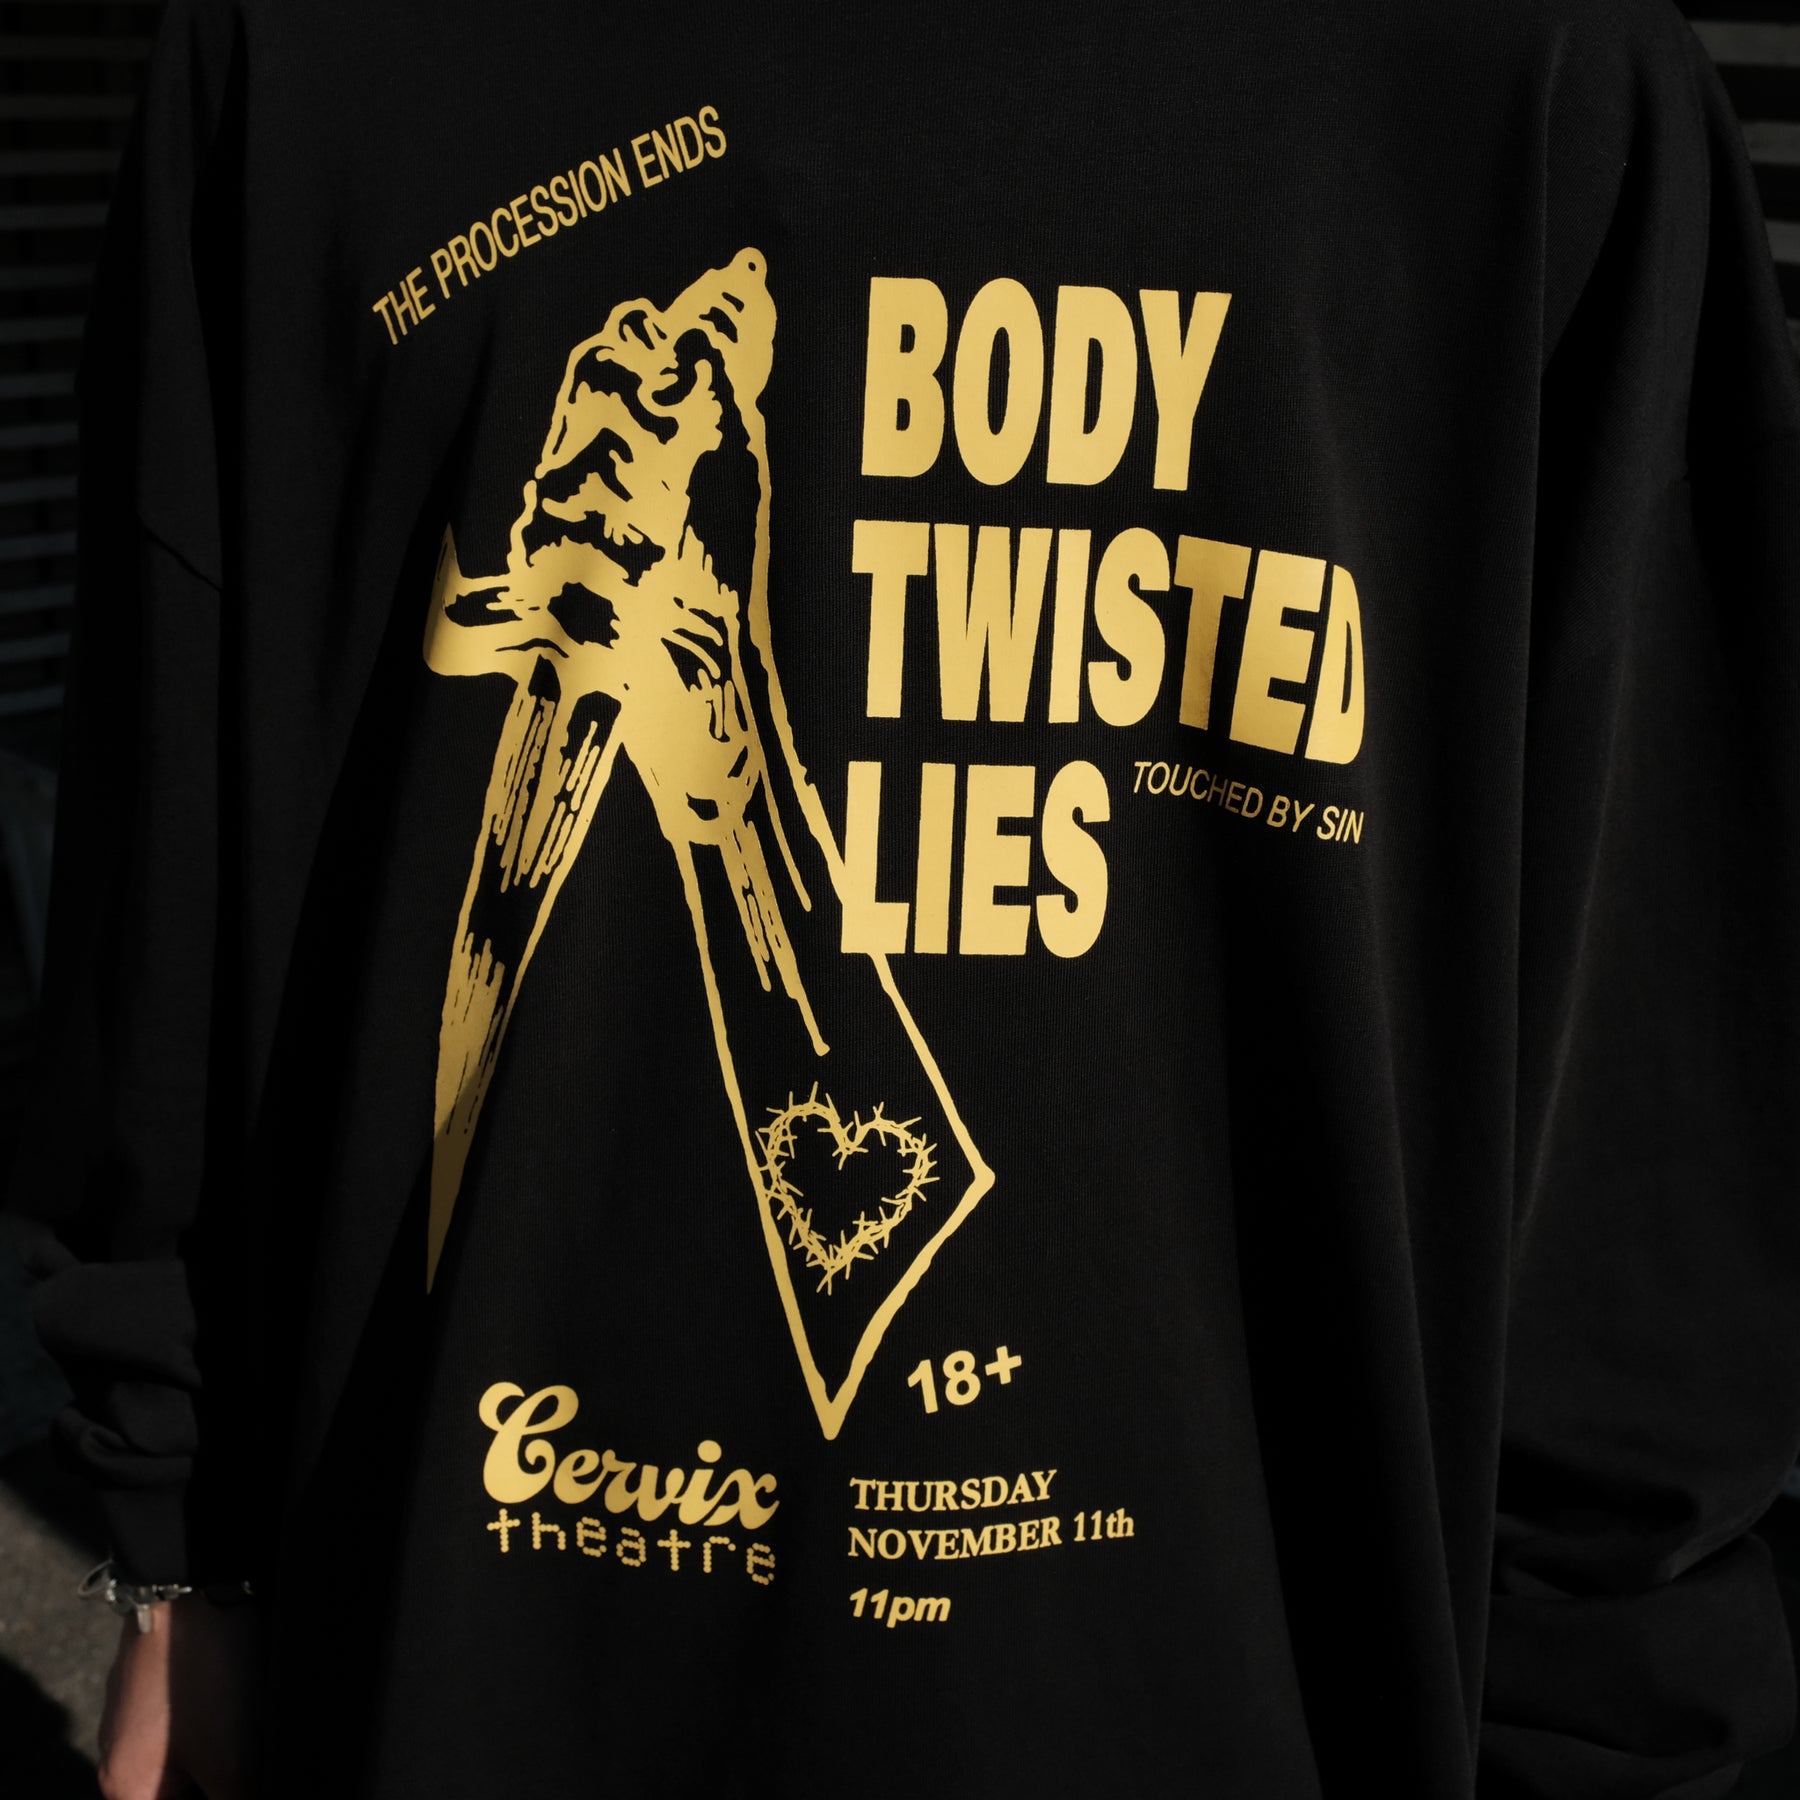 WILLY CHAVARRIA / BODY TWISTED LIES LS BUFFALO T SOLID BLACK